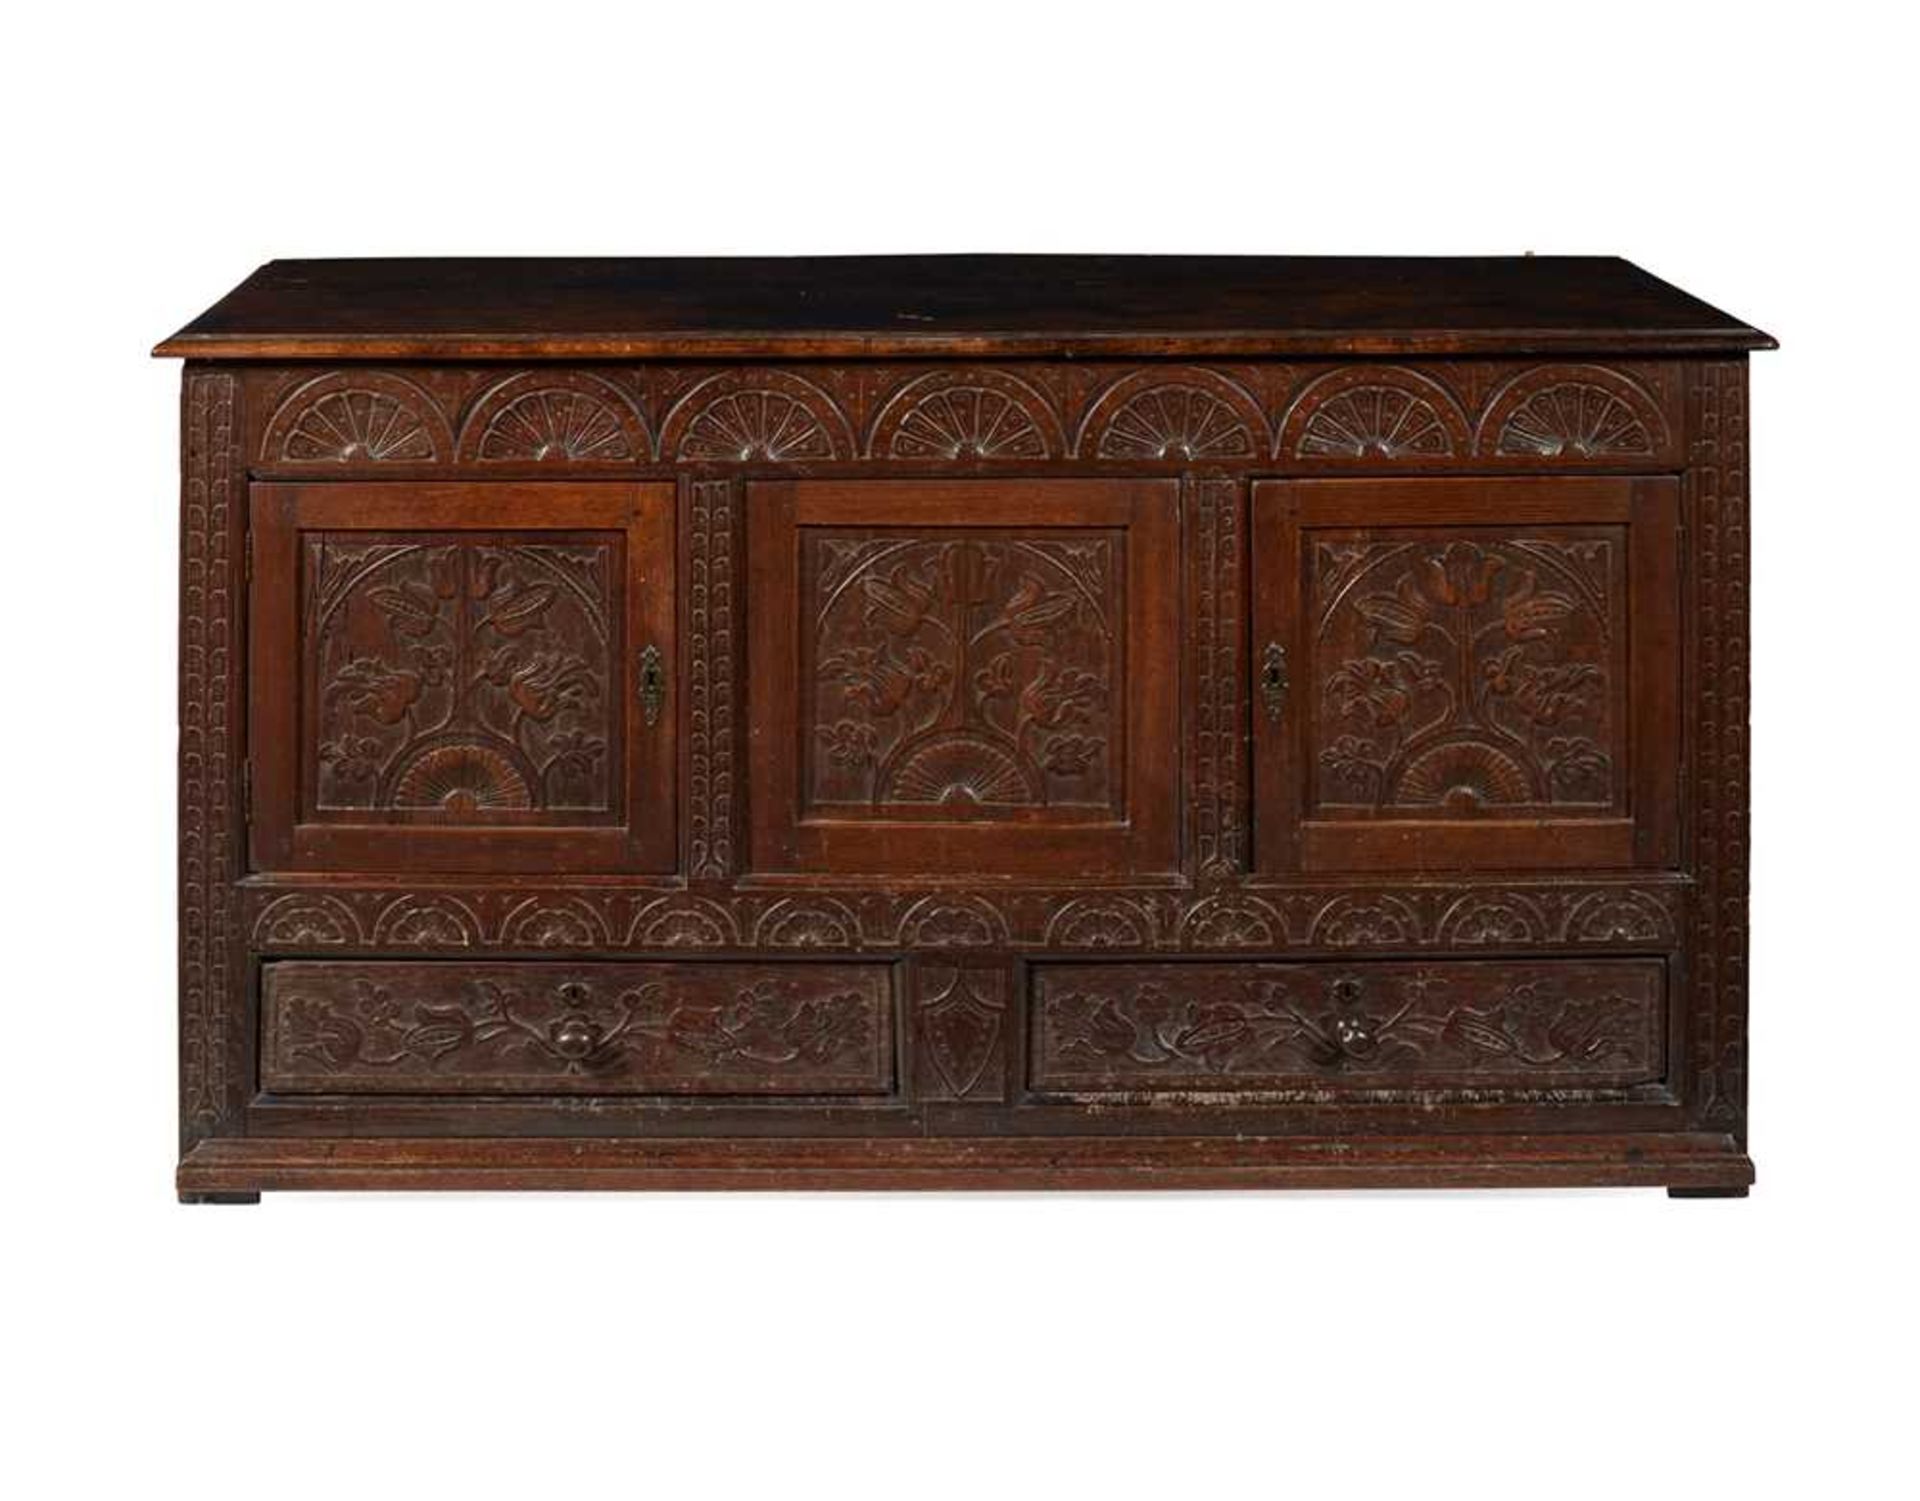 CARVED OAK MULE CHEST LATE 17TH CENTURY WITH ALTERATIONS